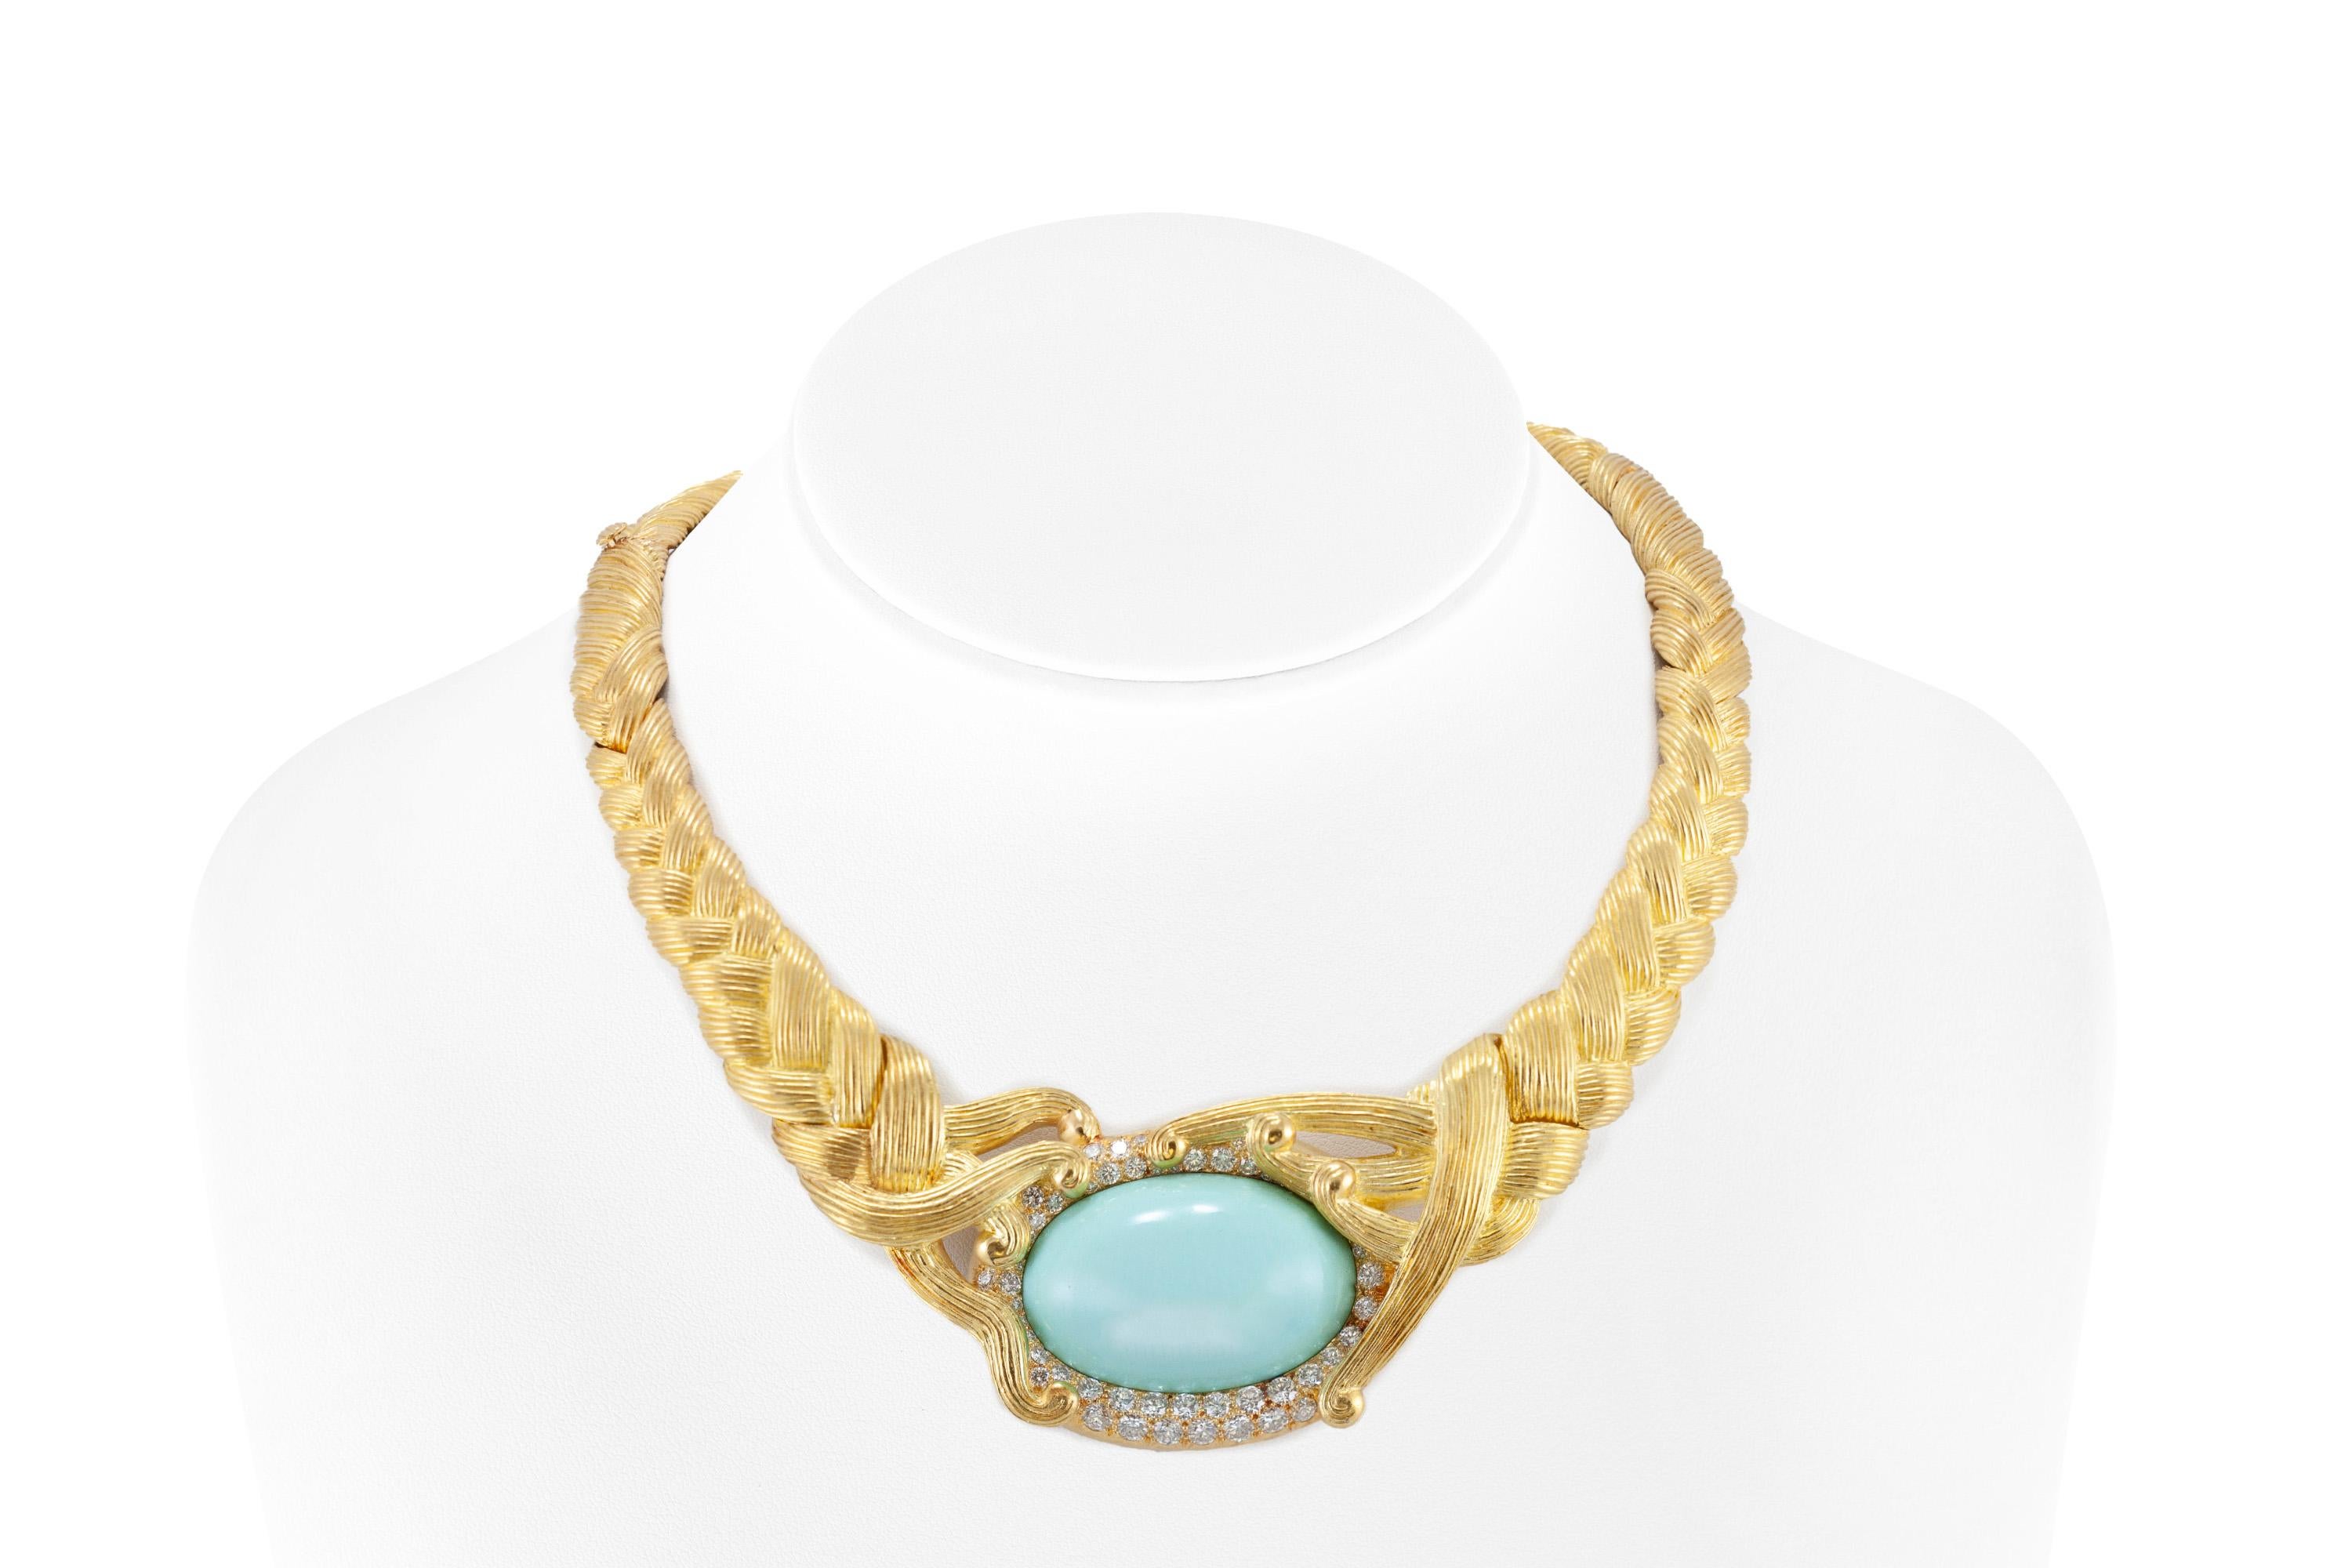 The beautiful Tiffany & Co by Angela Cummings necklace and earrings set is finely crafted in 18k gold with approximatiley a total of 70.00 carat of Turquoise and diamonds weighting approximately a total of 5.00 carat.
The set weighs a total of 159.4